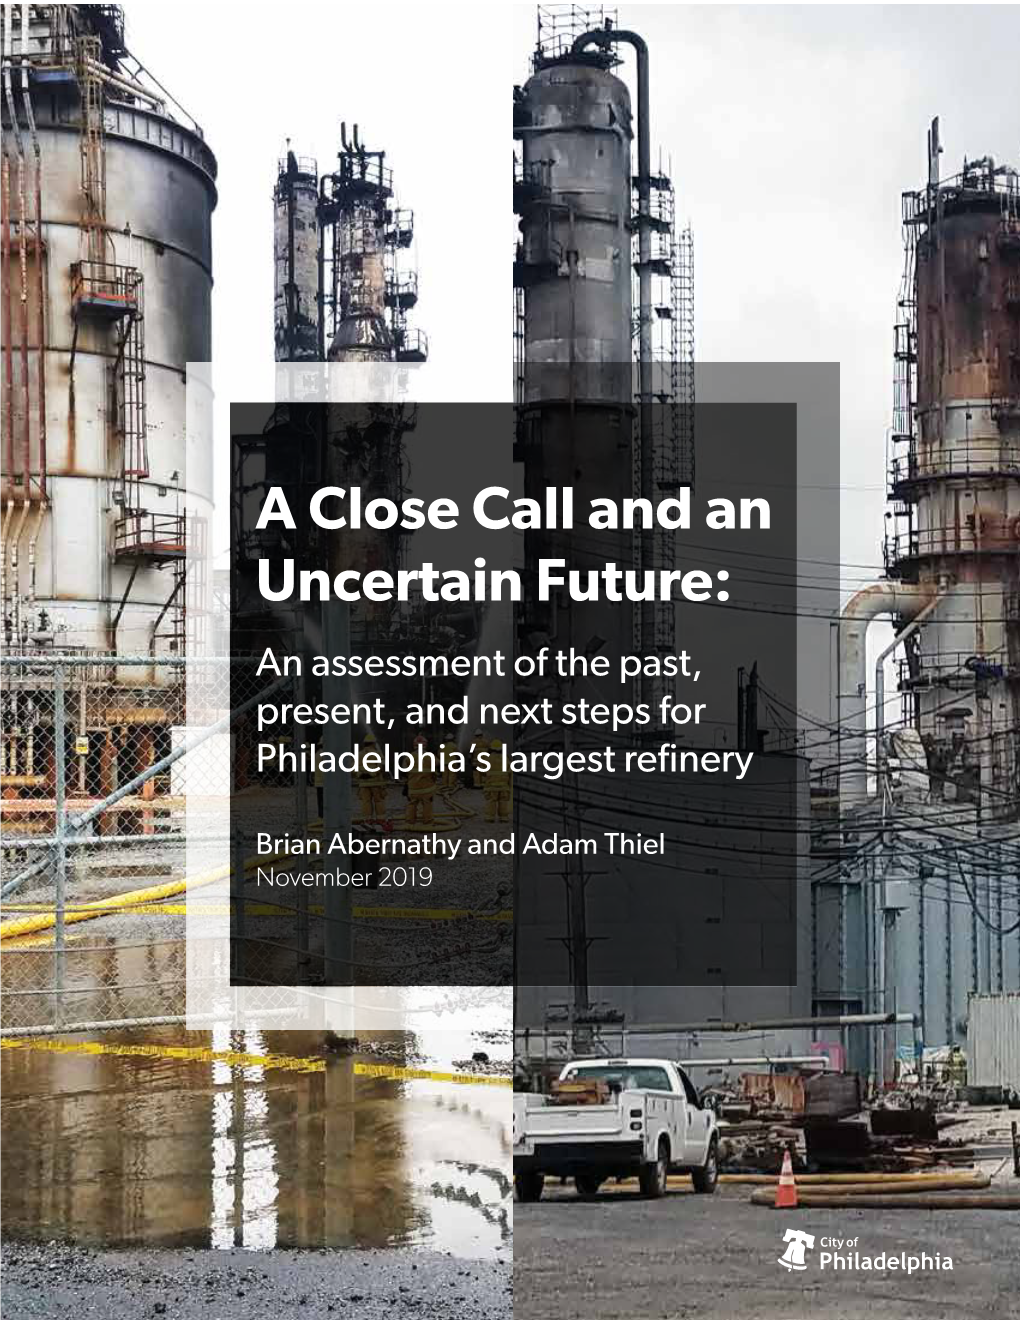 A Close Call and an Uncertain Future: an Assessment of the Past, Present, and Next Steps for Philadelphia’S Largest Refinery